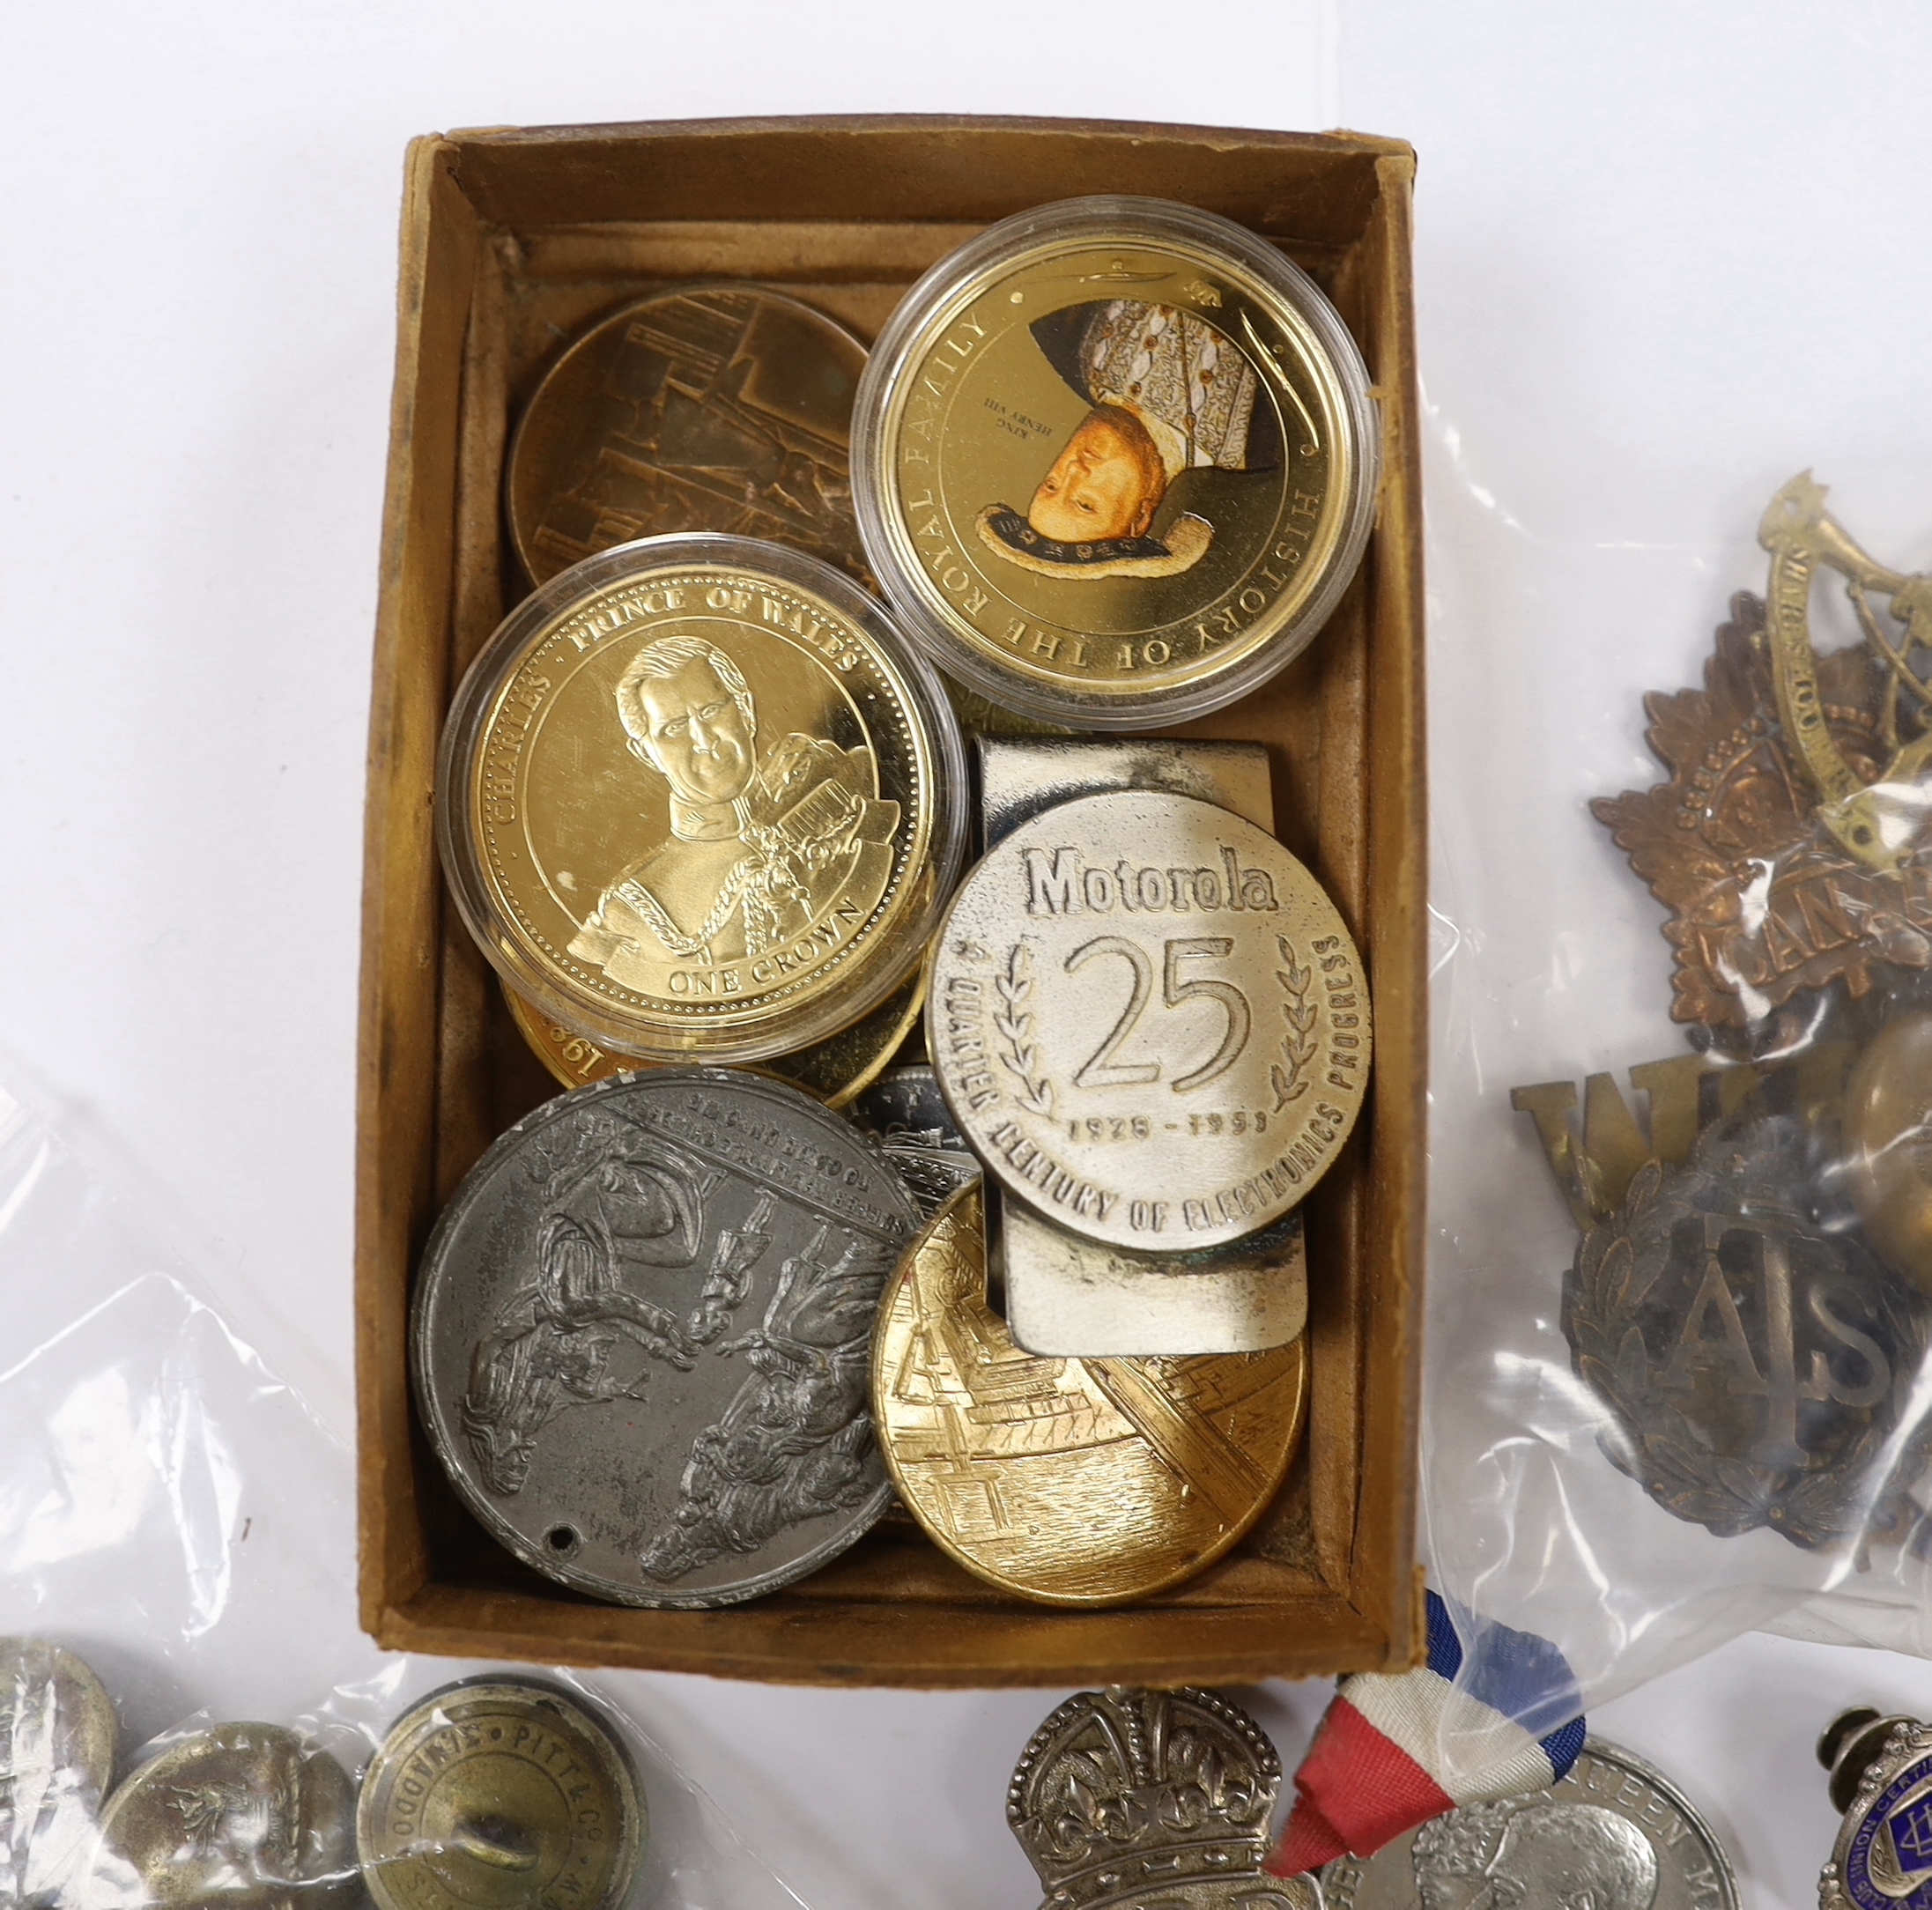 A collection of medals, cap badges, commemorative coins etc. including; a cased RMS Lusitania medal, Royal Artillery sweetheart brooches, a miniature WWII medal group of three stars; the 1939-45 Star, the Atlantic Star a